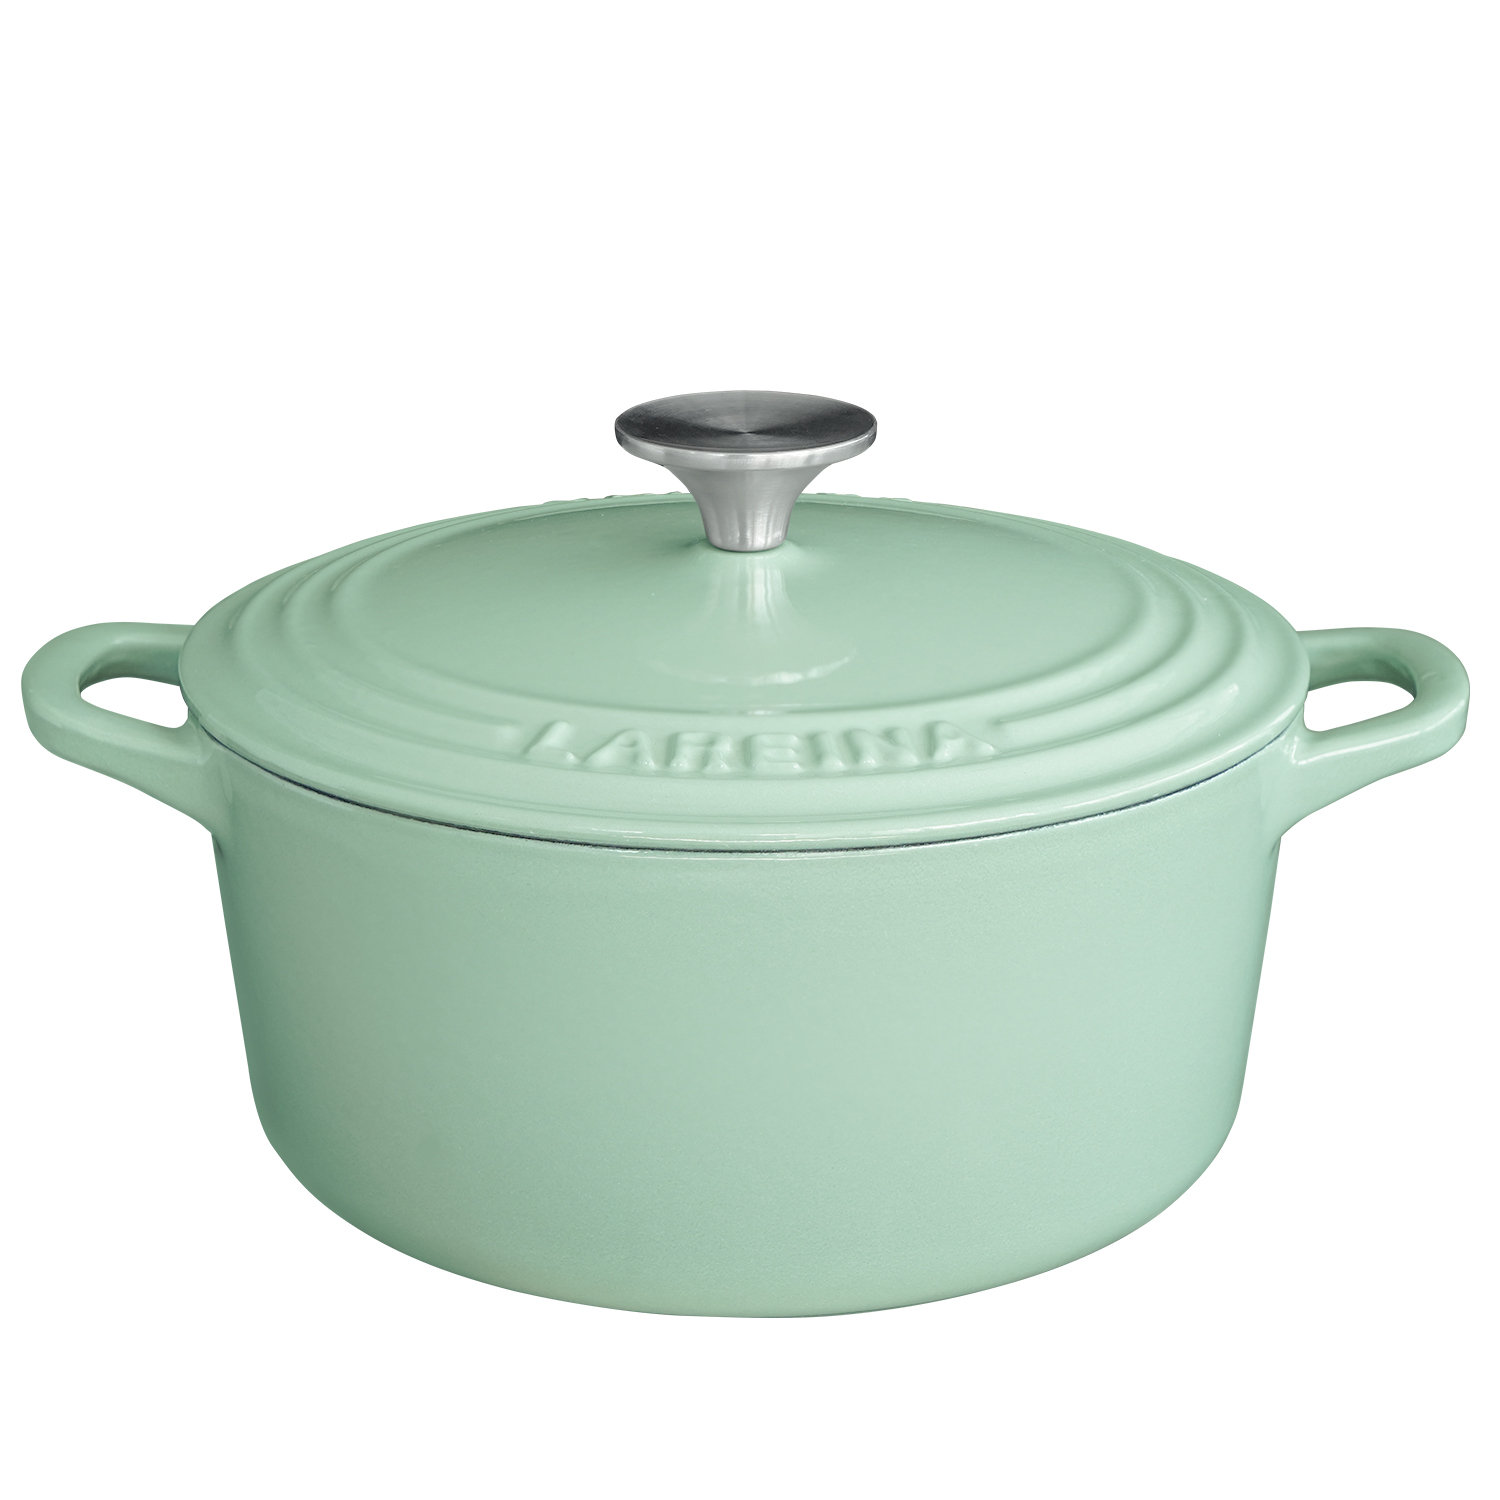  Lexi Home Cast Iron Enameled Dutch Oven Pot with Lid 5